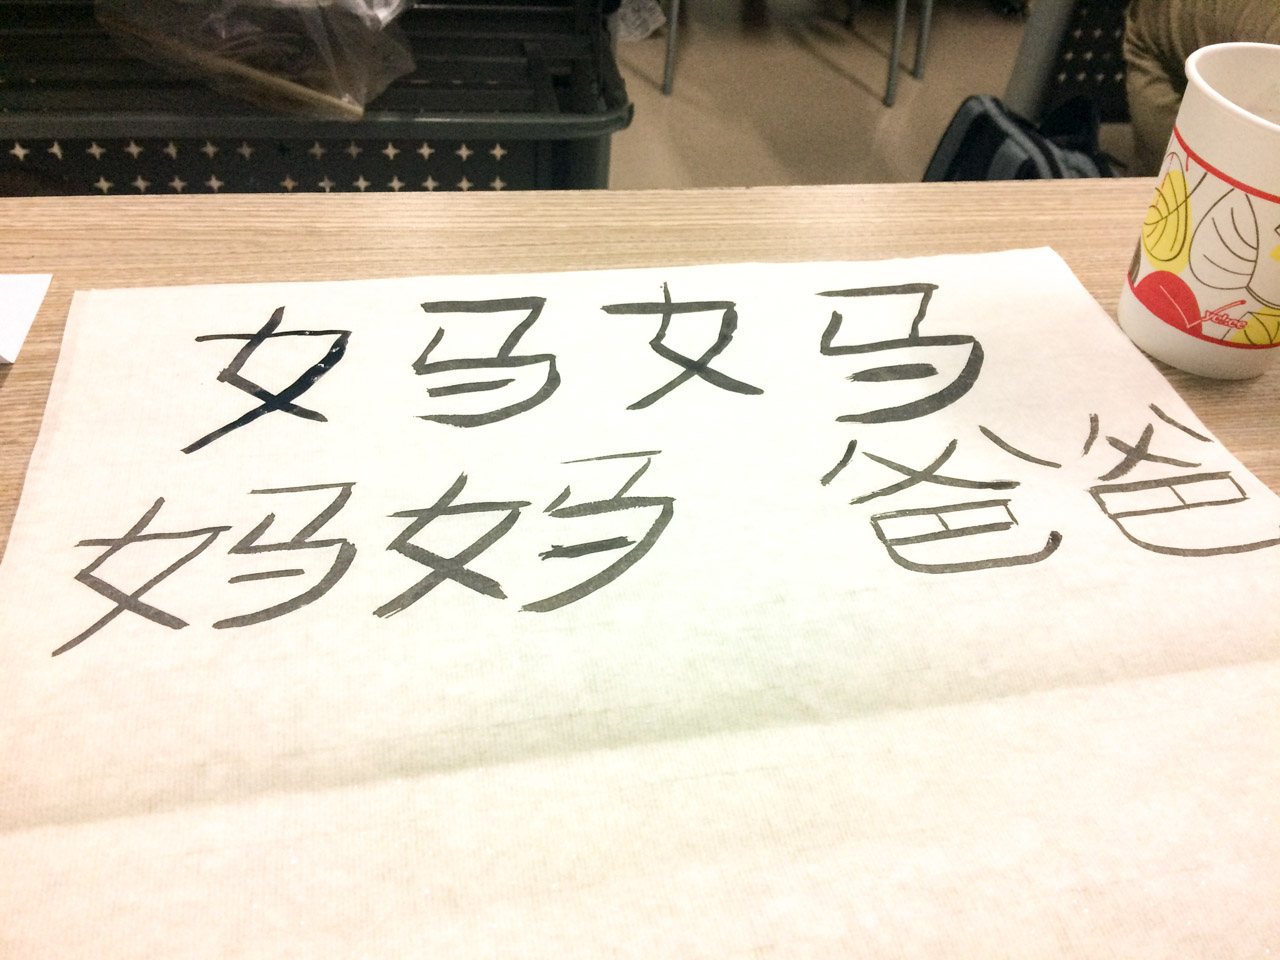 A close-up shot of various Chinese words written on special calligraphy paper